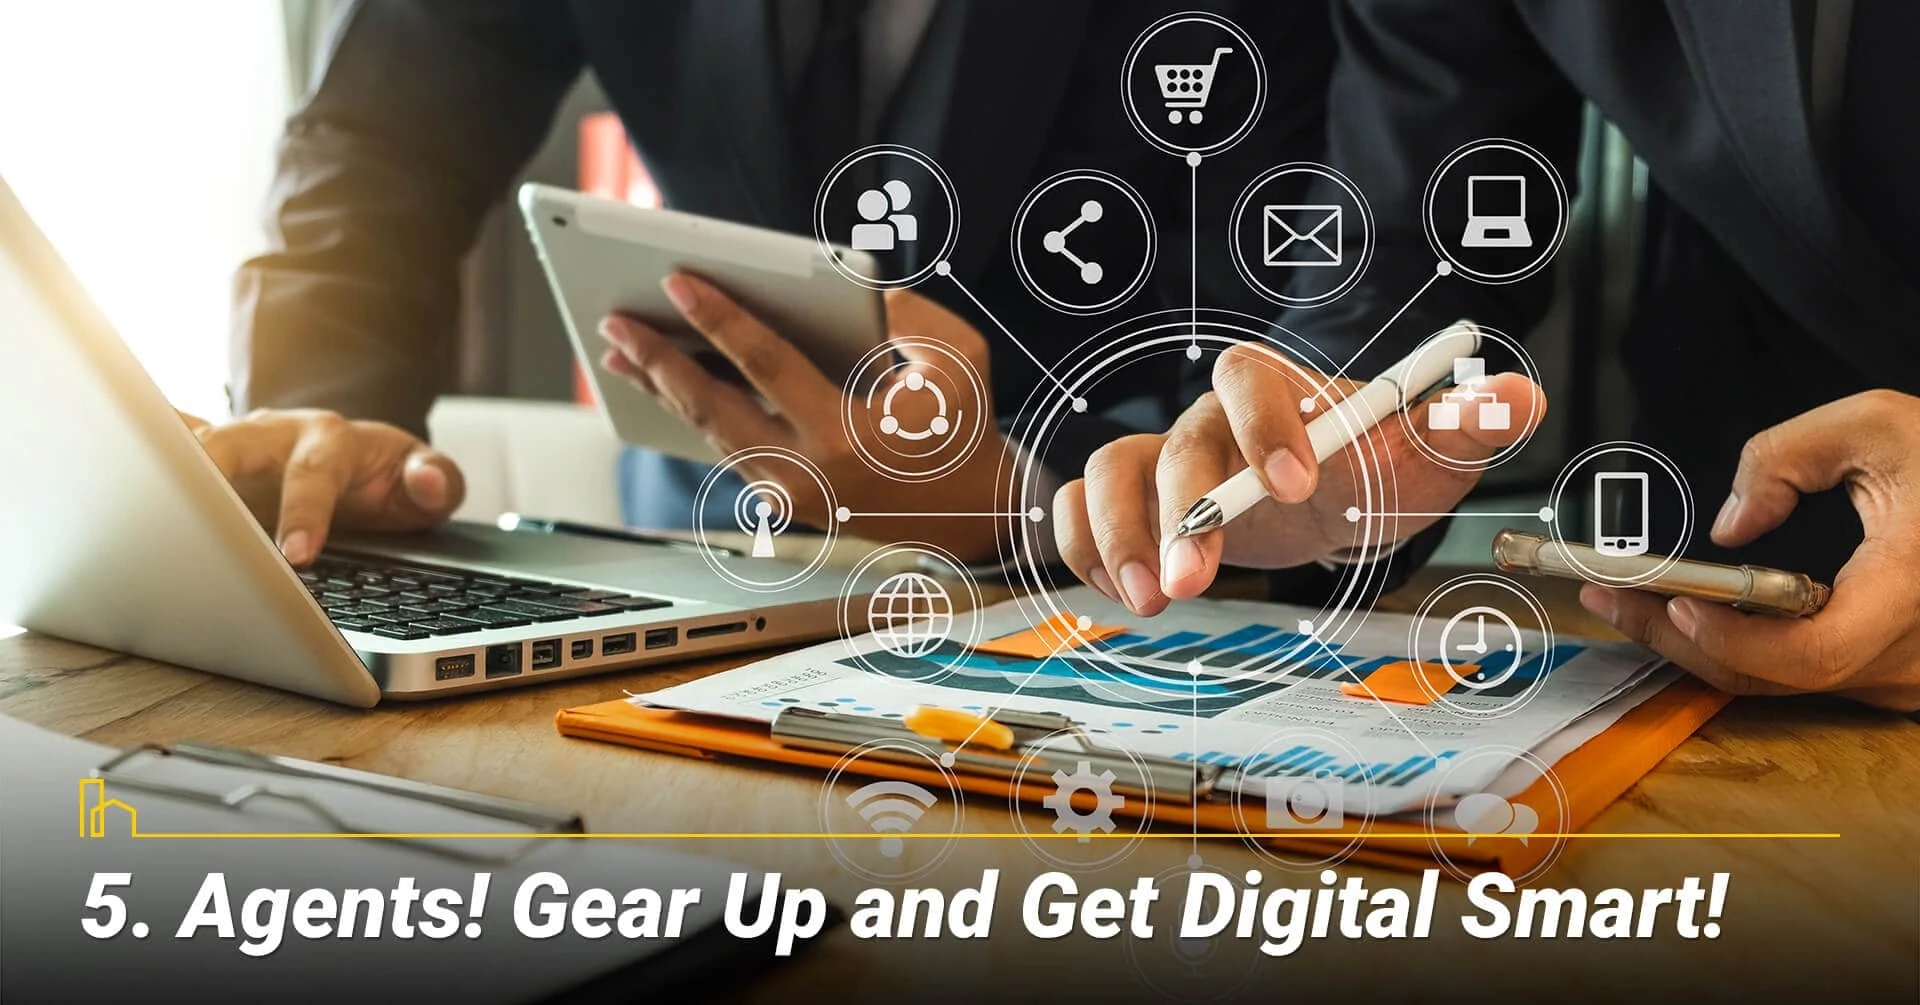 Agents! Gear Up and Get Digital Smart! be adaptable to new technologies